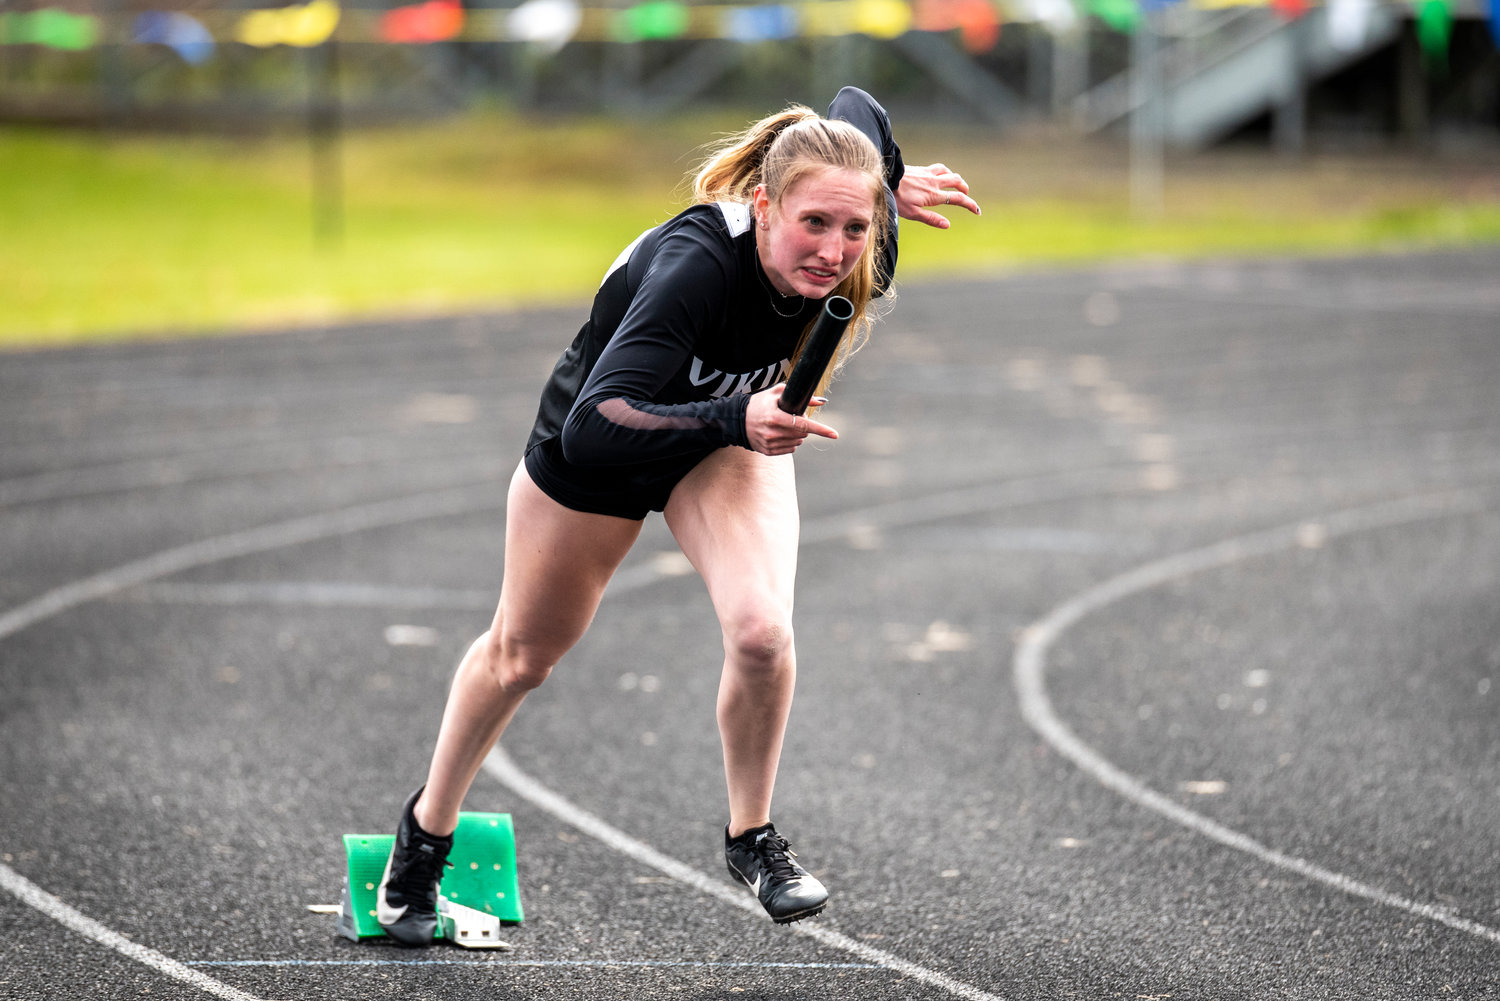 Mossyrock's Teaguen Weise takes off from the starting blocks in the 4x200-relay at the 1B District IV track and field championships on May 11 in Raymond. Weise won four events to help the Vikings place second as a team.